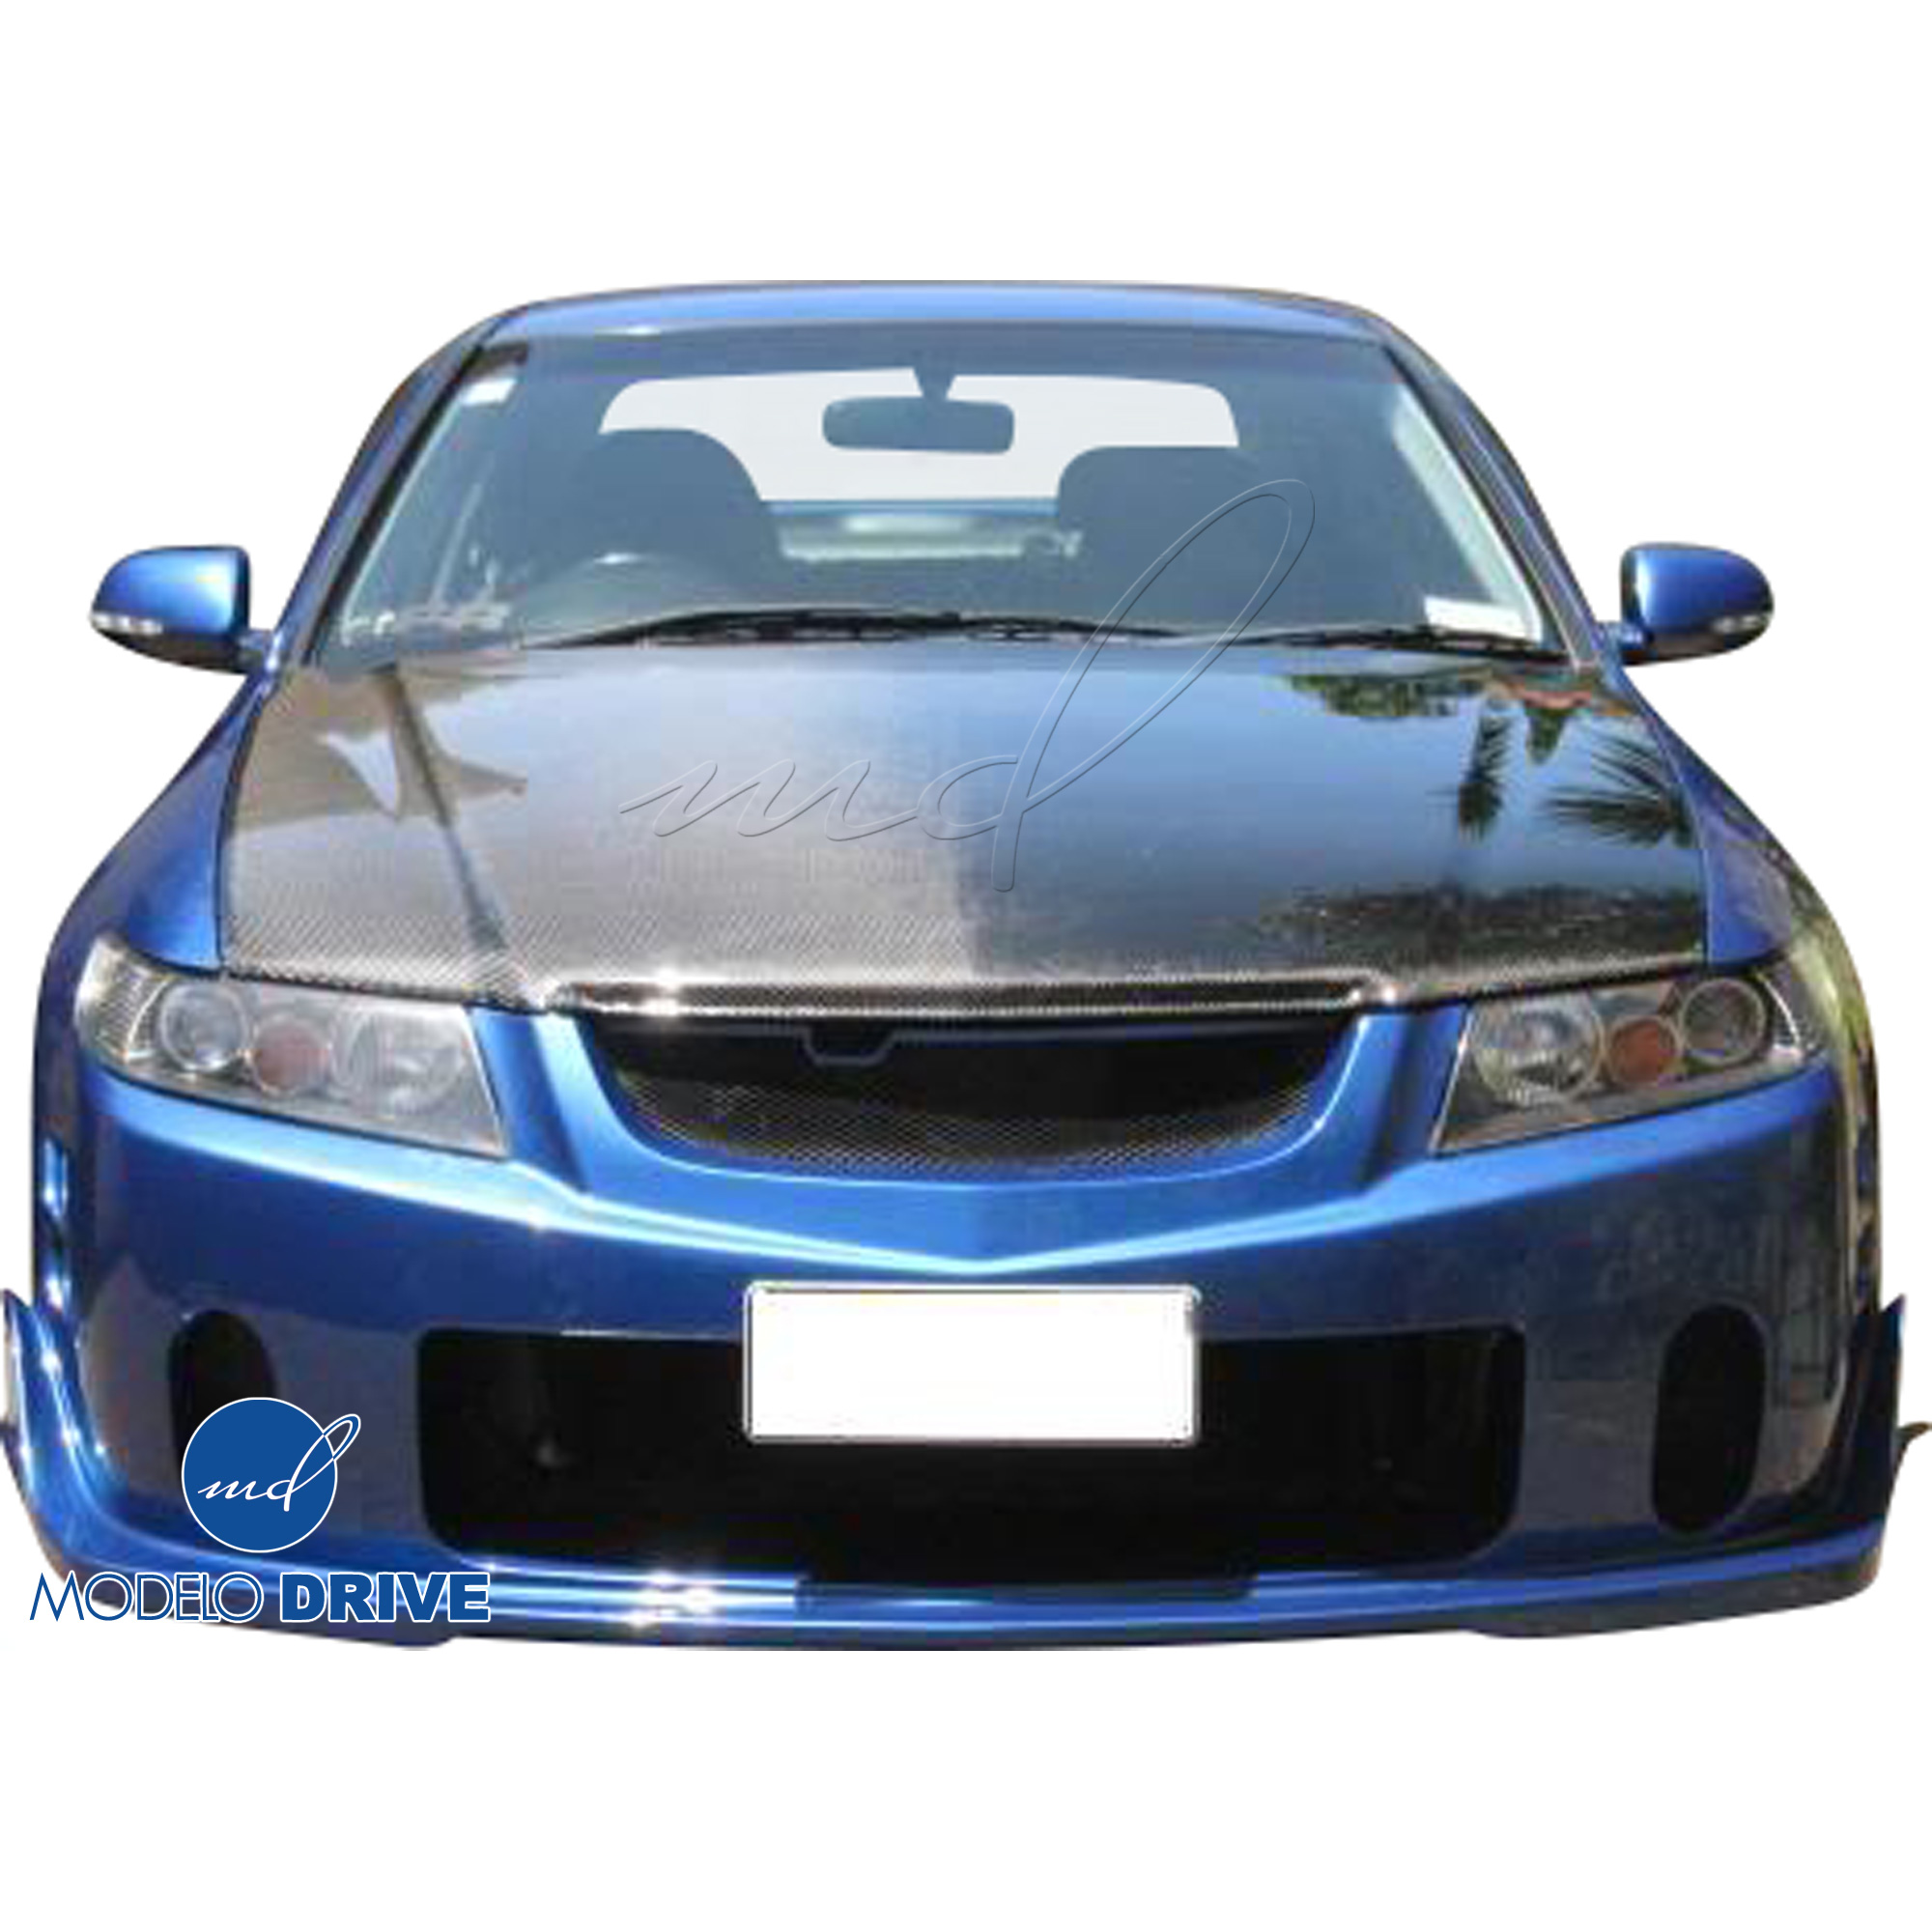 ModeloDrive FRP BC2 Front Bumper > Acura TSX CL9 2004-2008 - Image 13